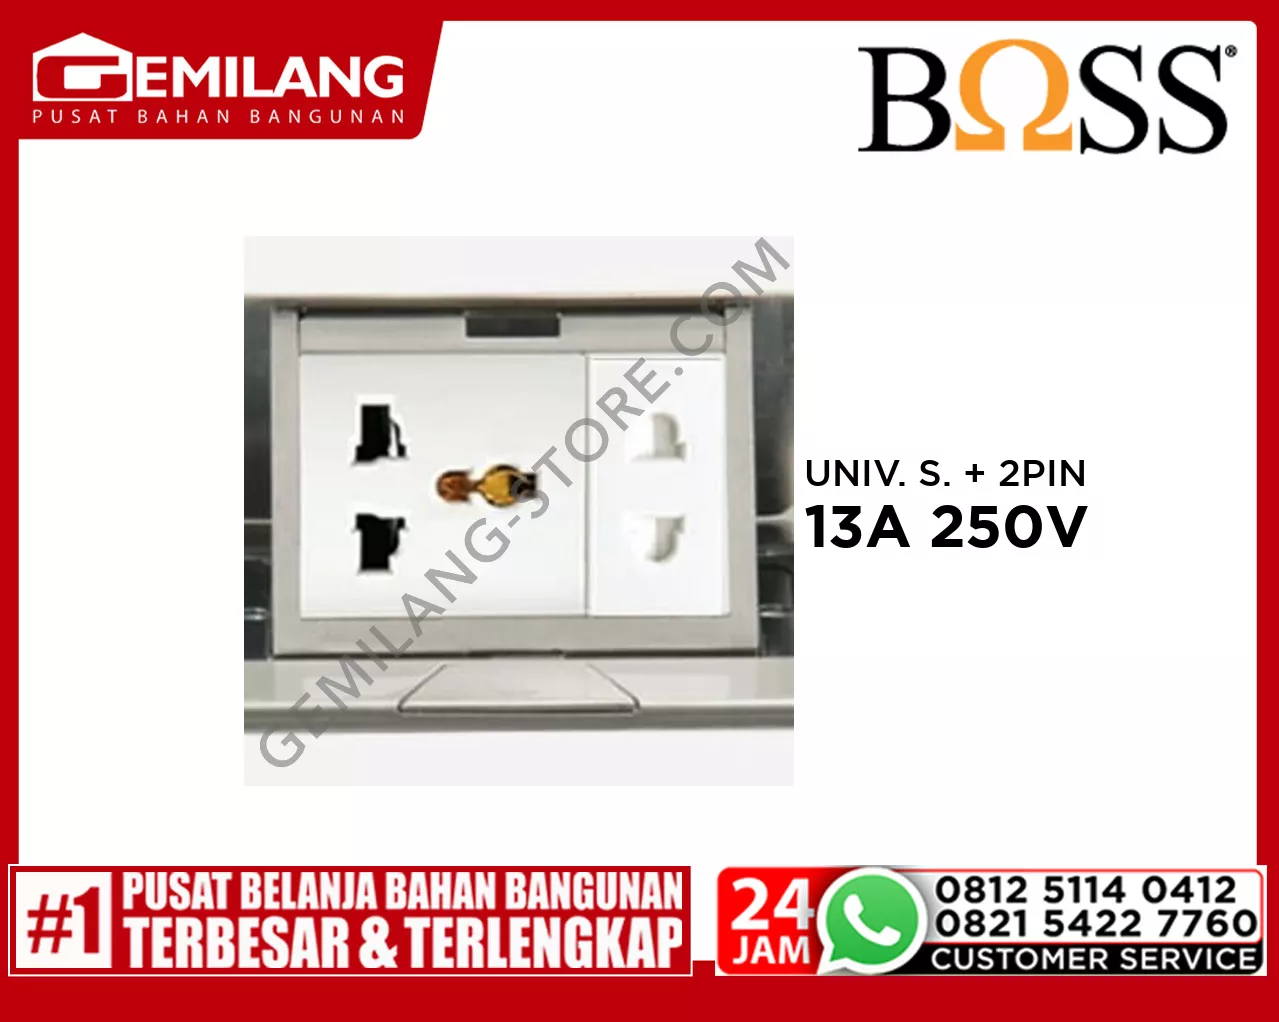 BOSS UNIVERSAL SOCKET + 2 PIN SOCKET OUTLET 13A 250V BF0426/10IS-US